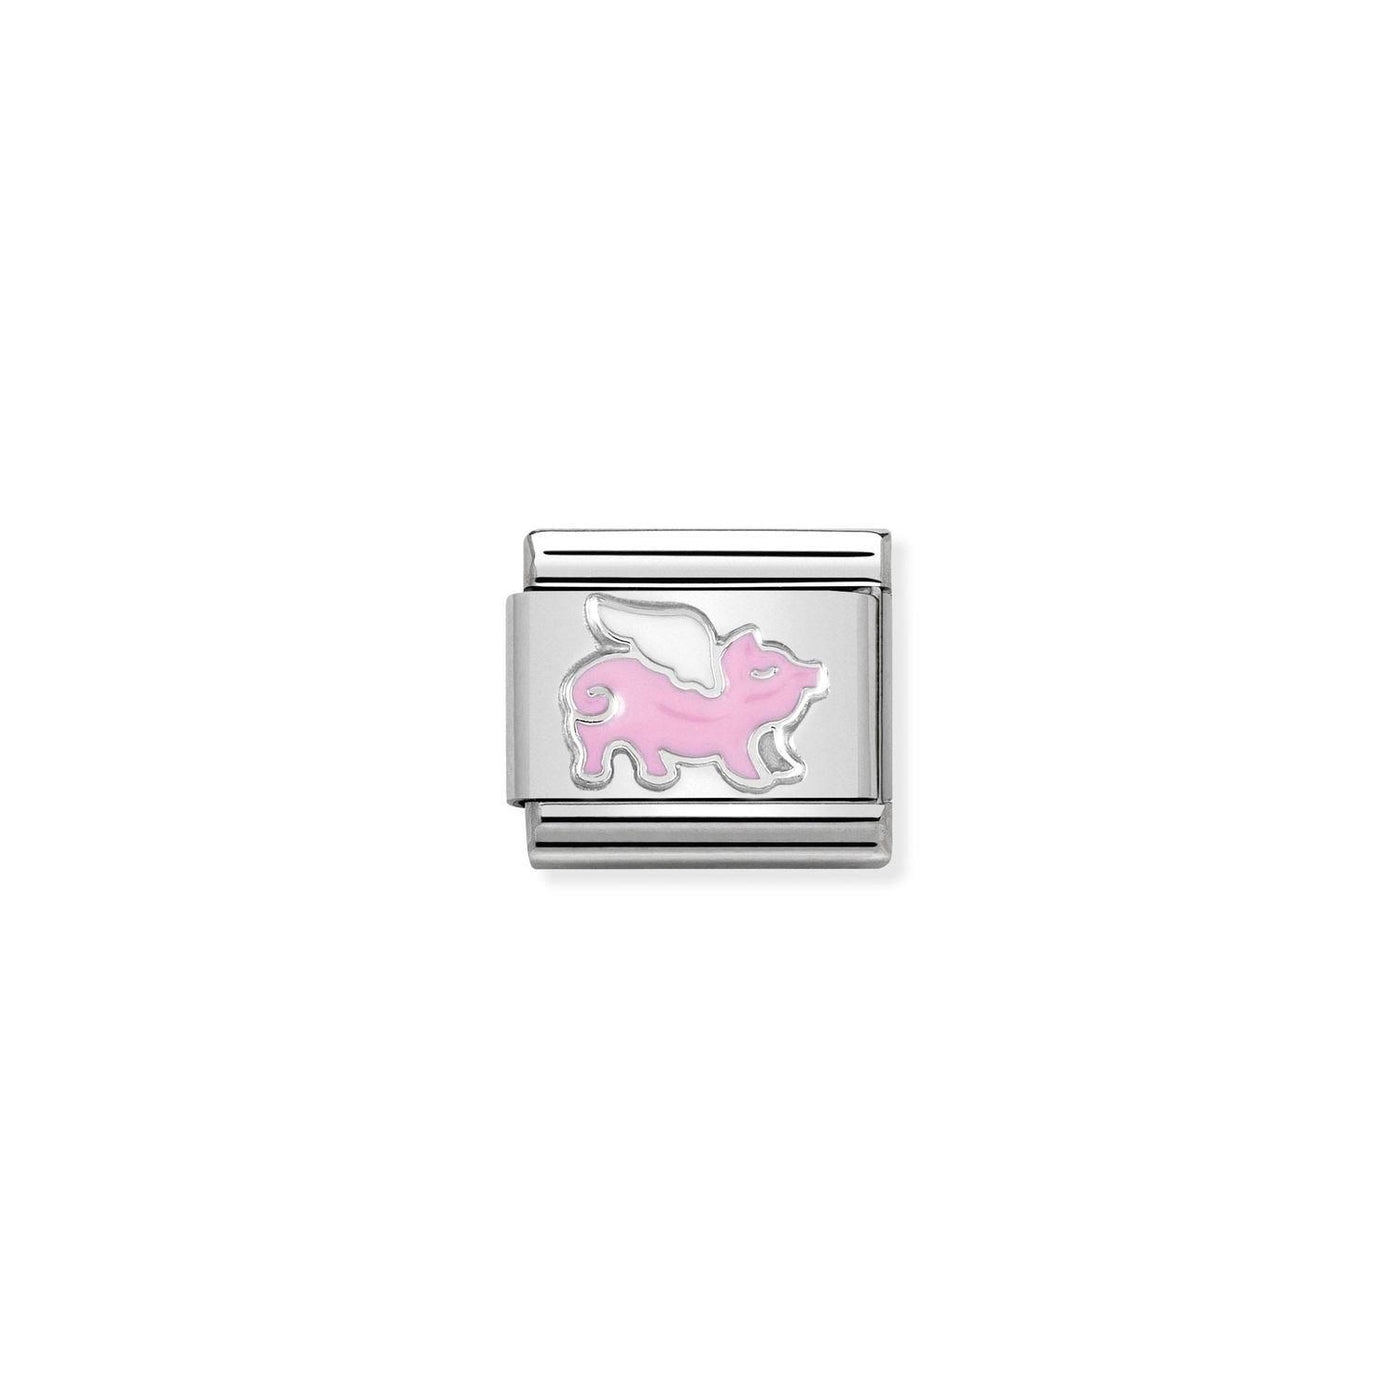 Nomination Classic Silver and Pink Flying Pig Link Charm